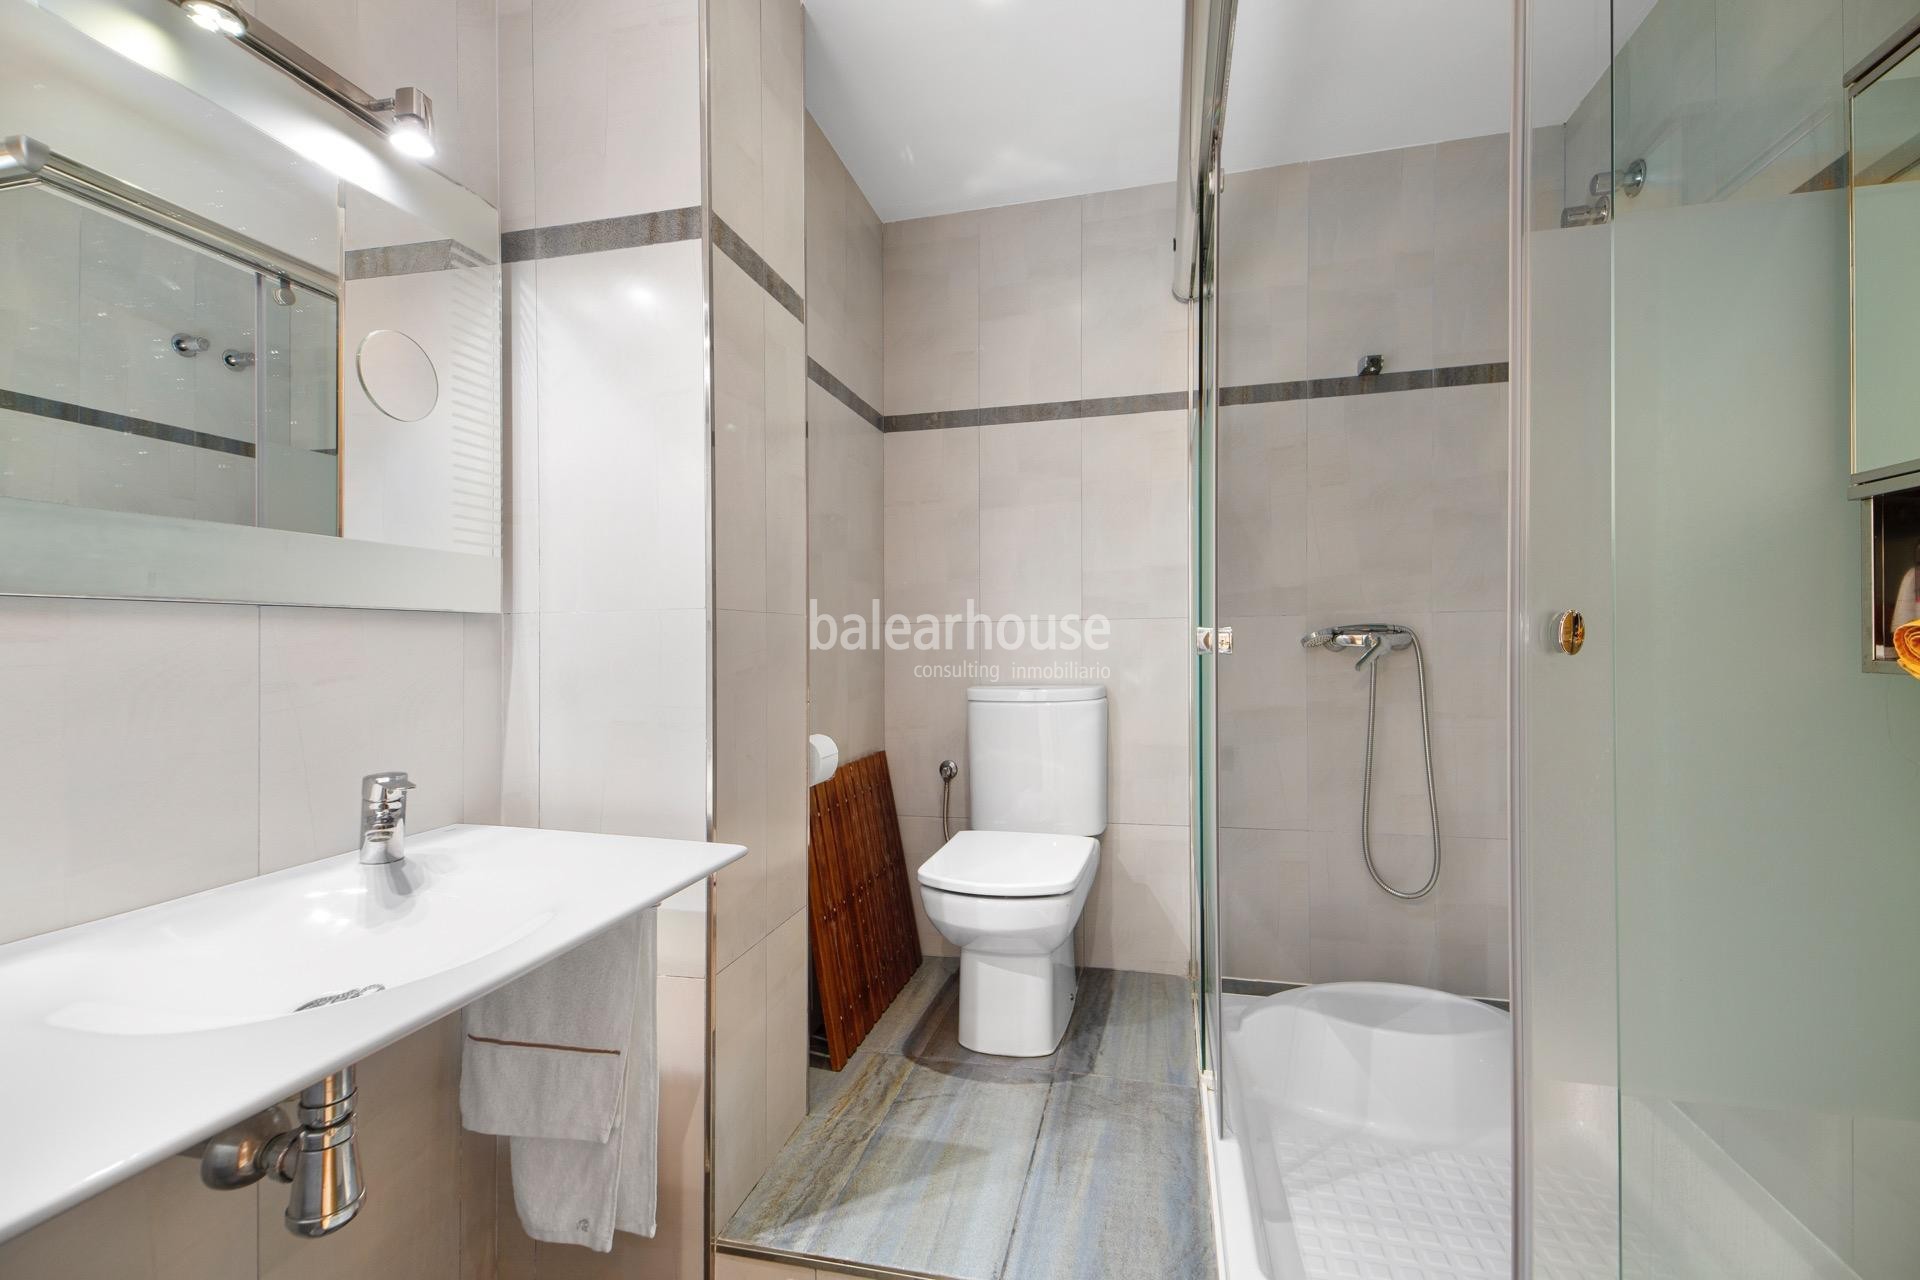 Excellent and bright flat of large dimensions located in the centre of Palma.